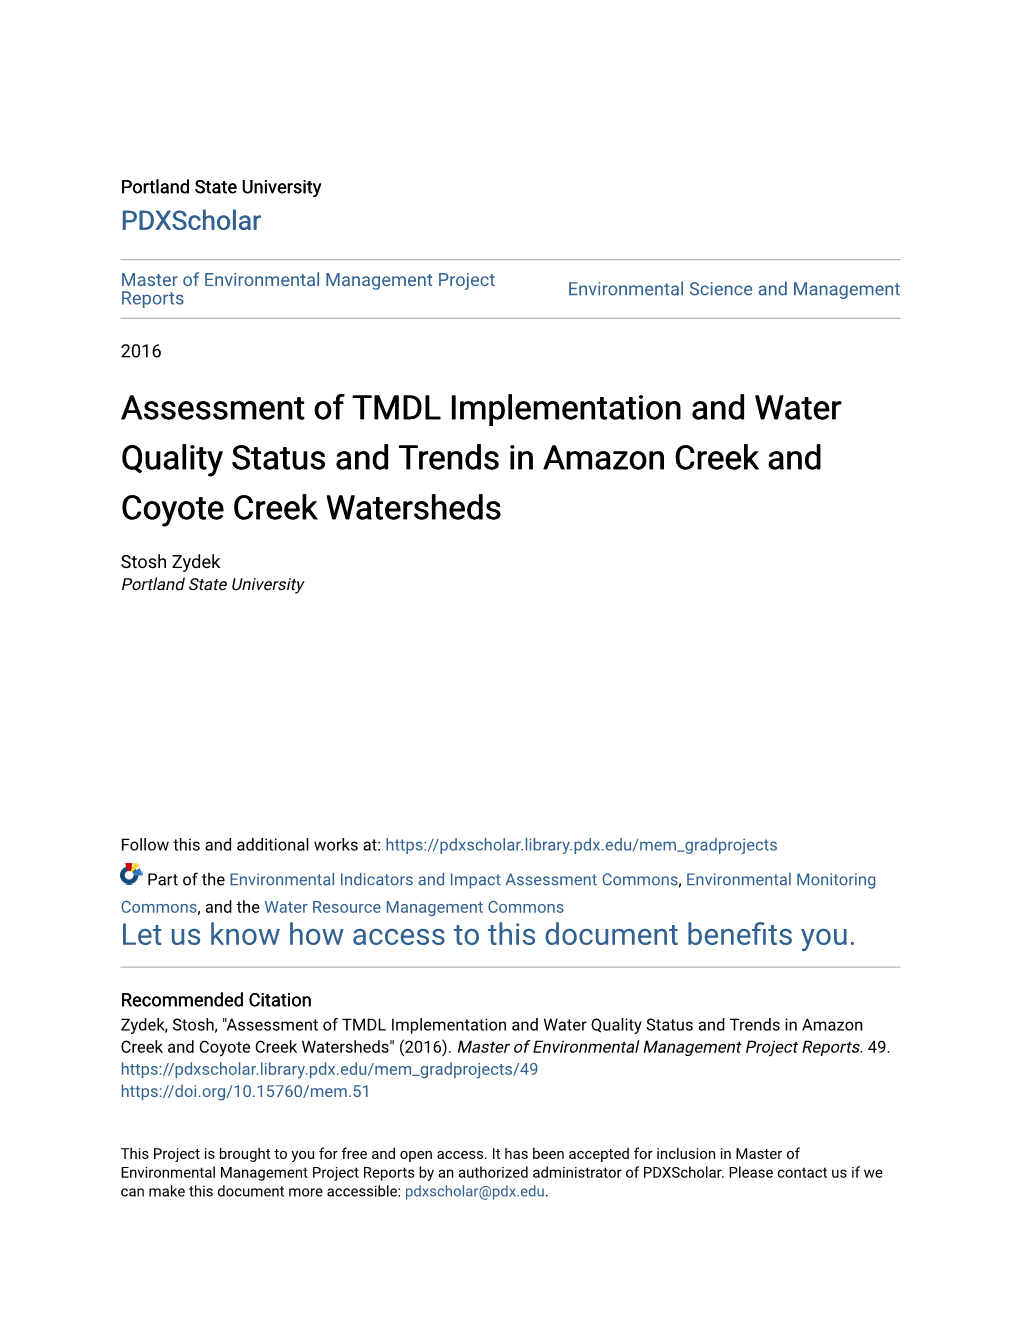 Assessment of TMDL Implementation and Water Quality Status and Trends in Amazon Creek and Coyote Creek Watersheds